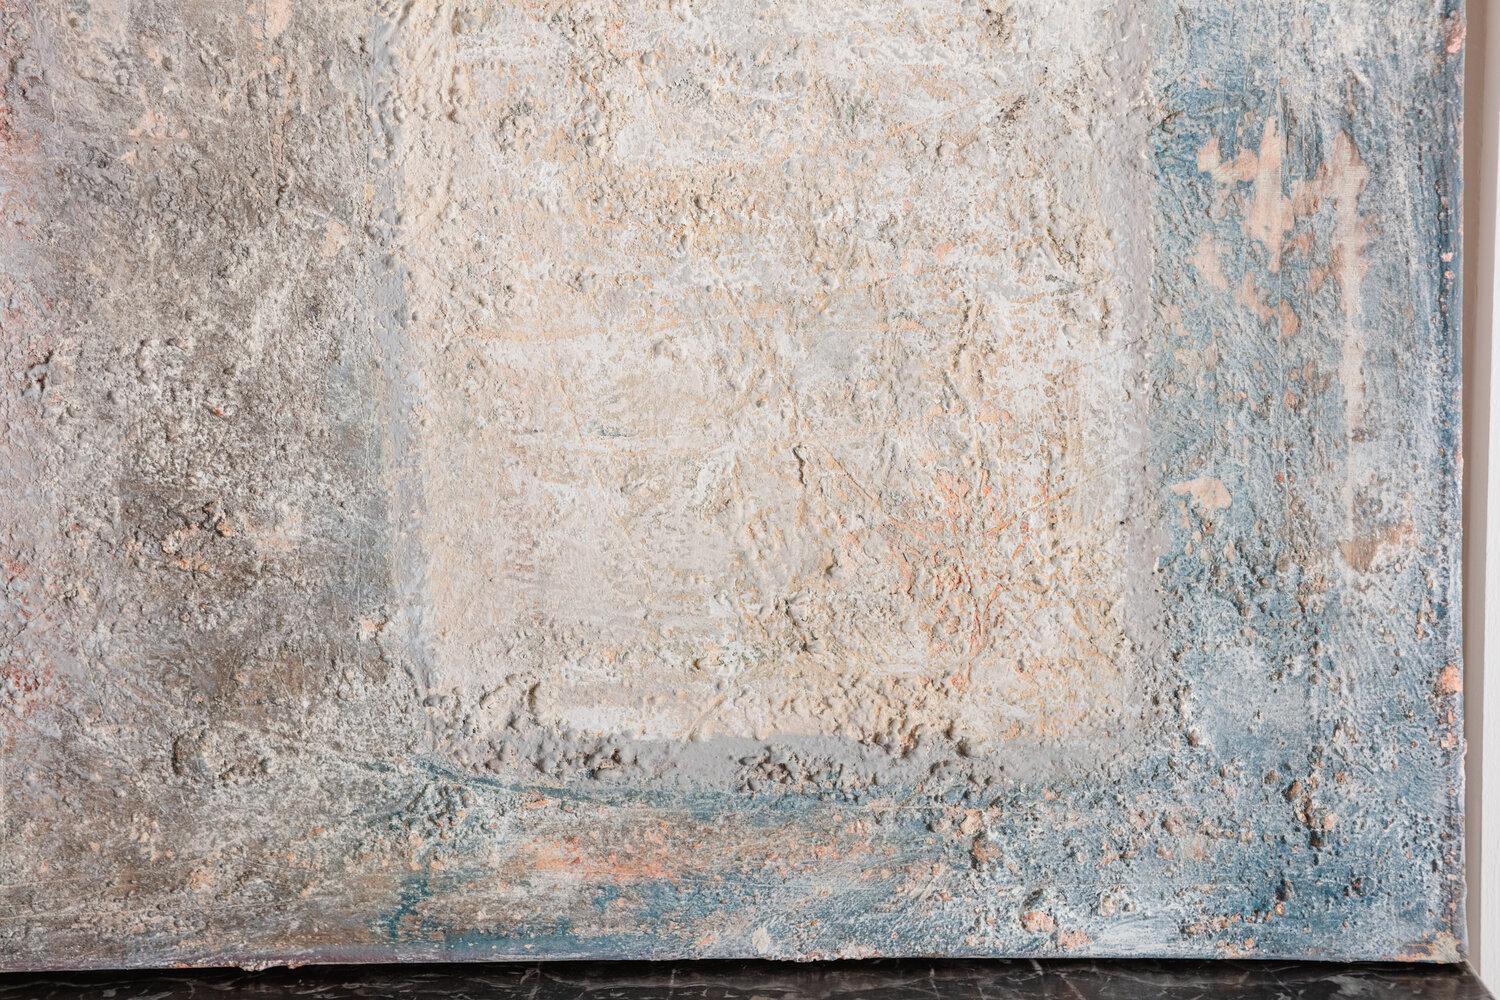 Oil and sand create a beautifully textural piece by Mexican artist Yishai Jusidman (1963). This piece is signed and dated (1982) by the artist on the lower right. 

  